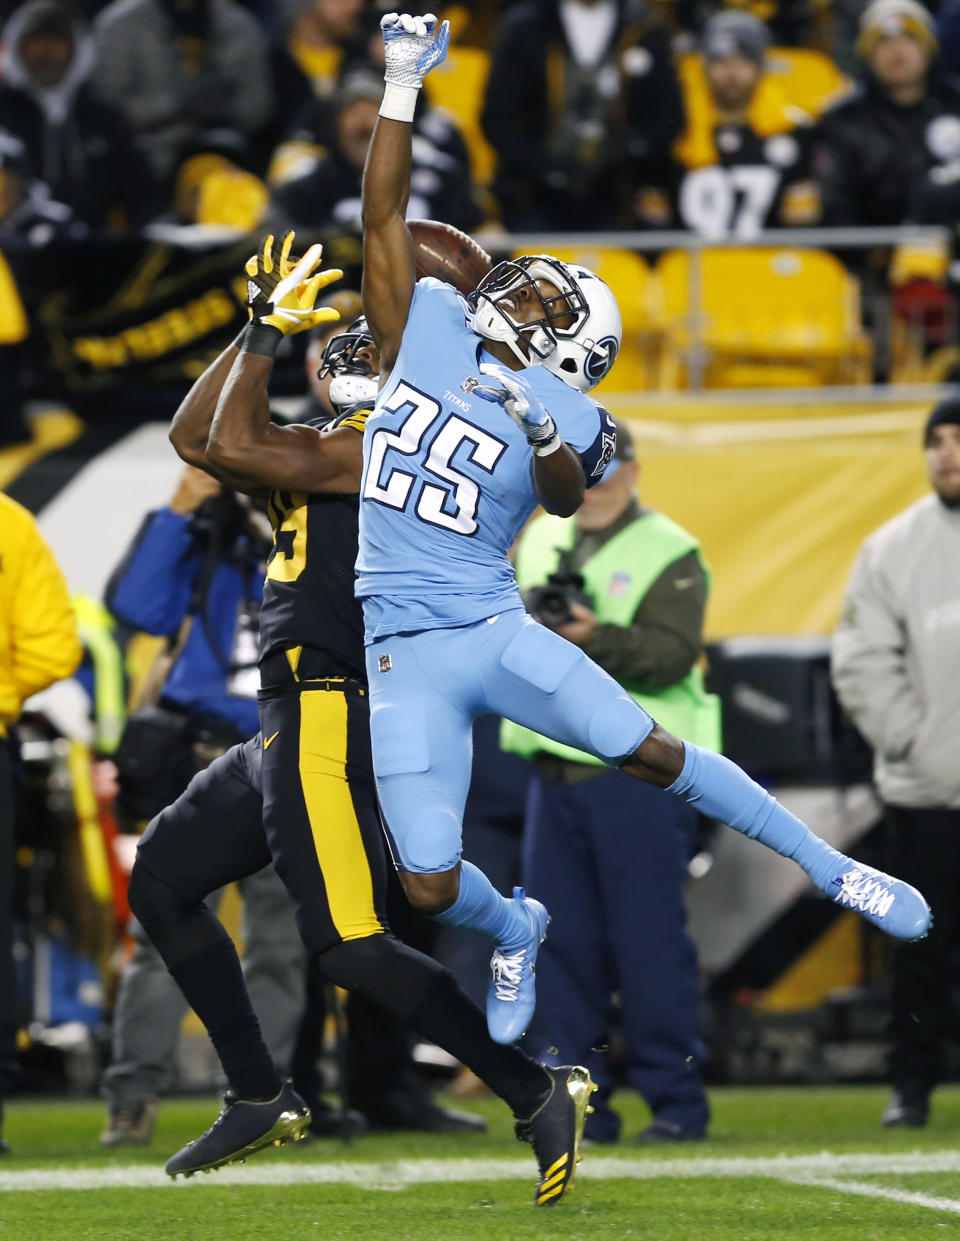 <p>Tennessee Titans cornerback Adoree’ Jackson (25) breaks up a pass intended for Pittsburgh Steelers wide receiver JuJu Smith-Schuster (19) during the first half of an NFL football game in Pittsburgh, Thursday, Nov. 16, 2017. (AP Photo/Keith Srakocic) </p>